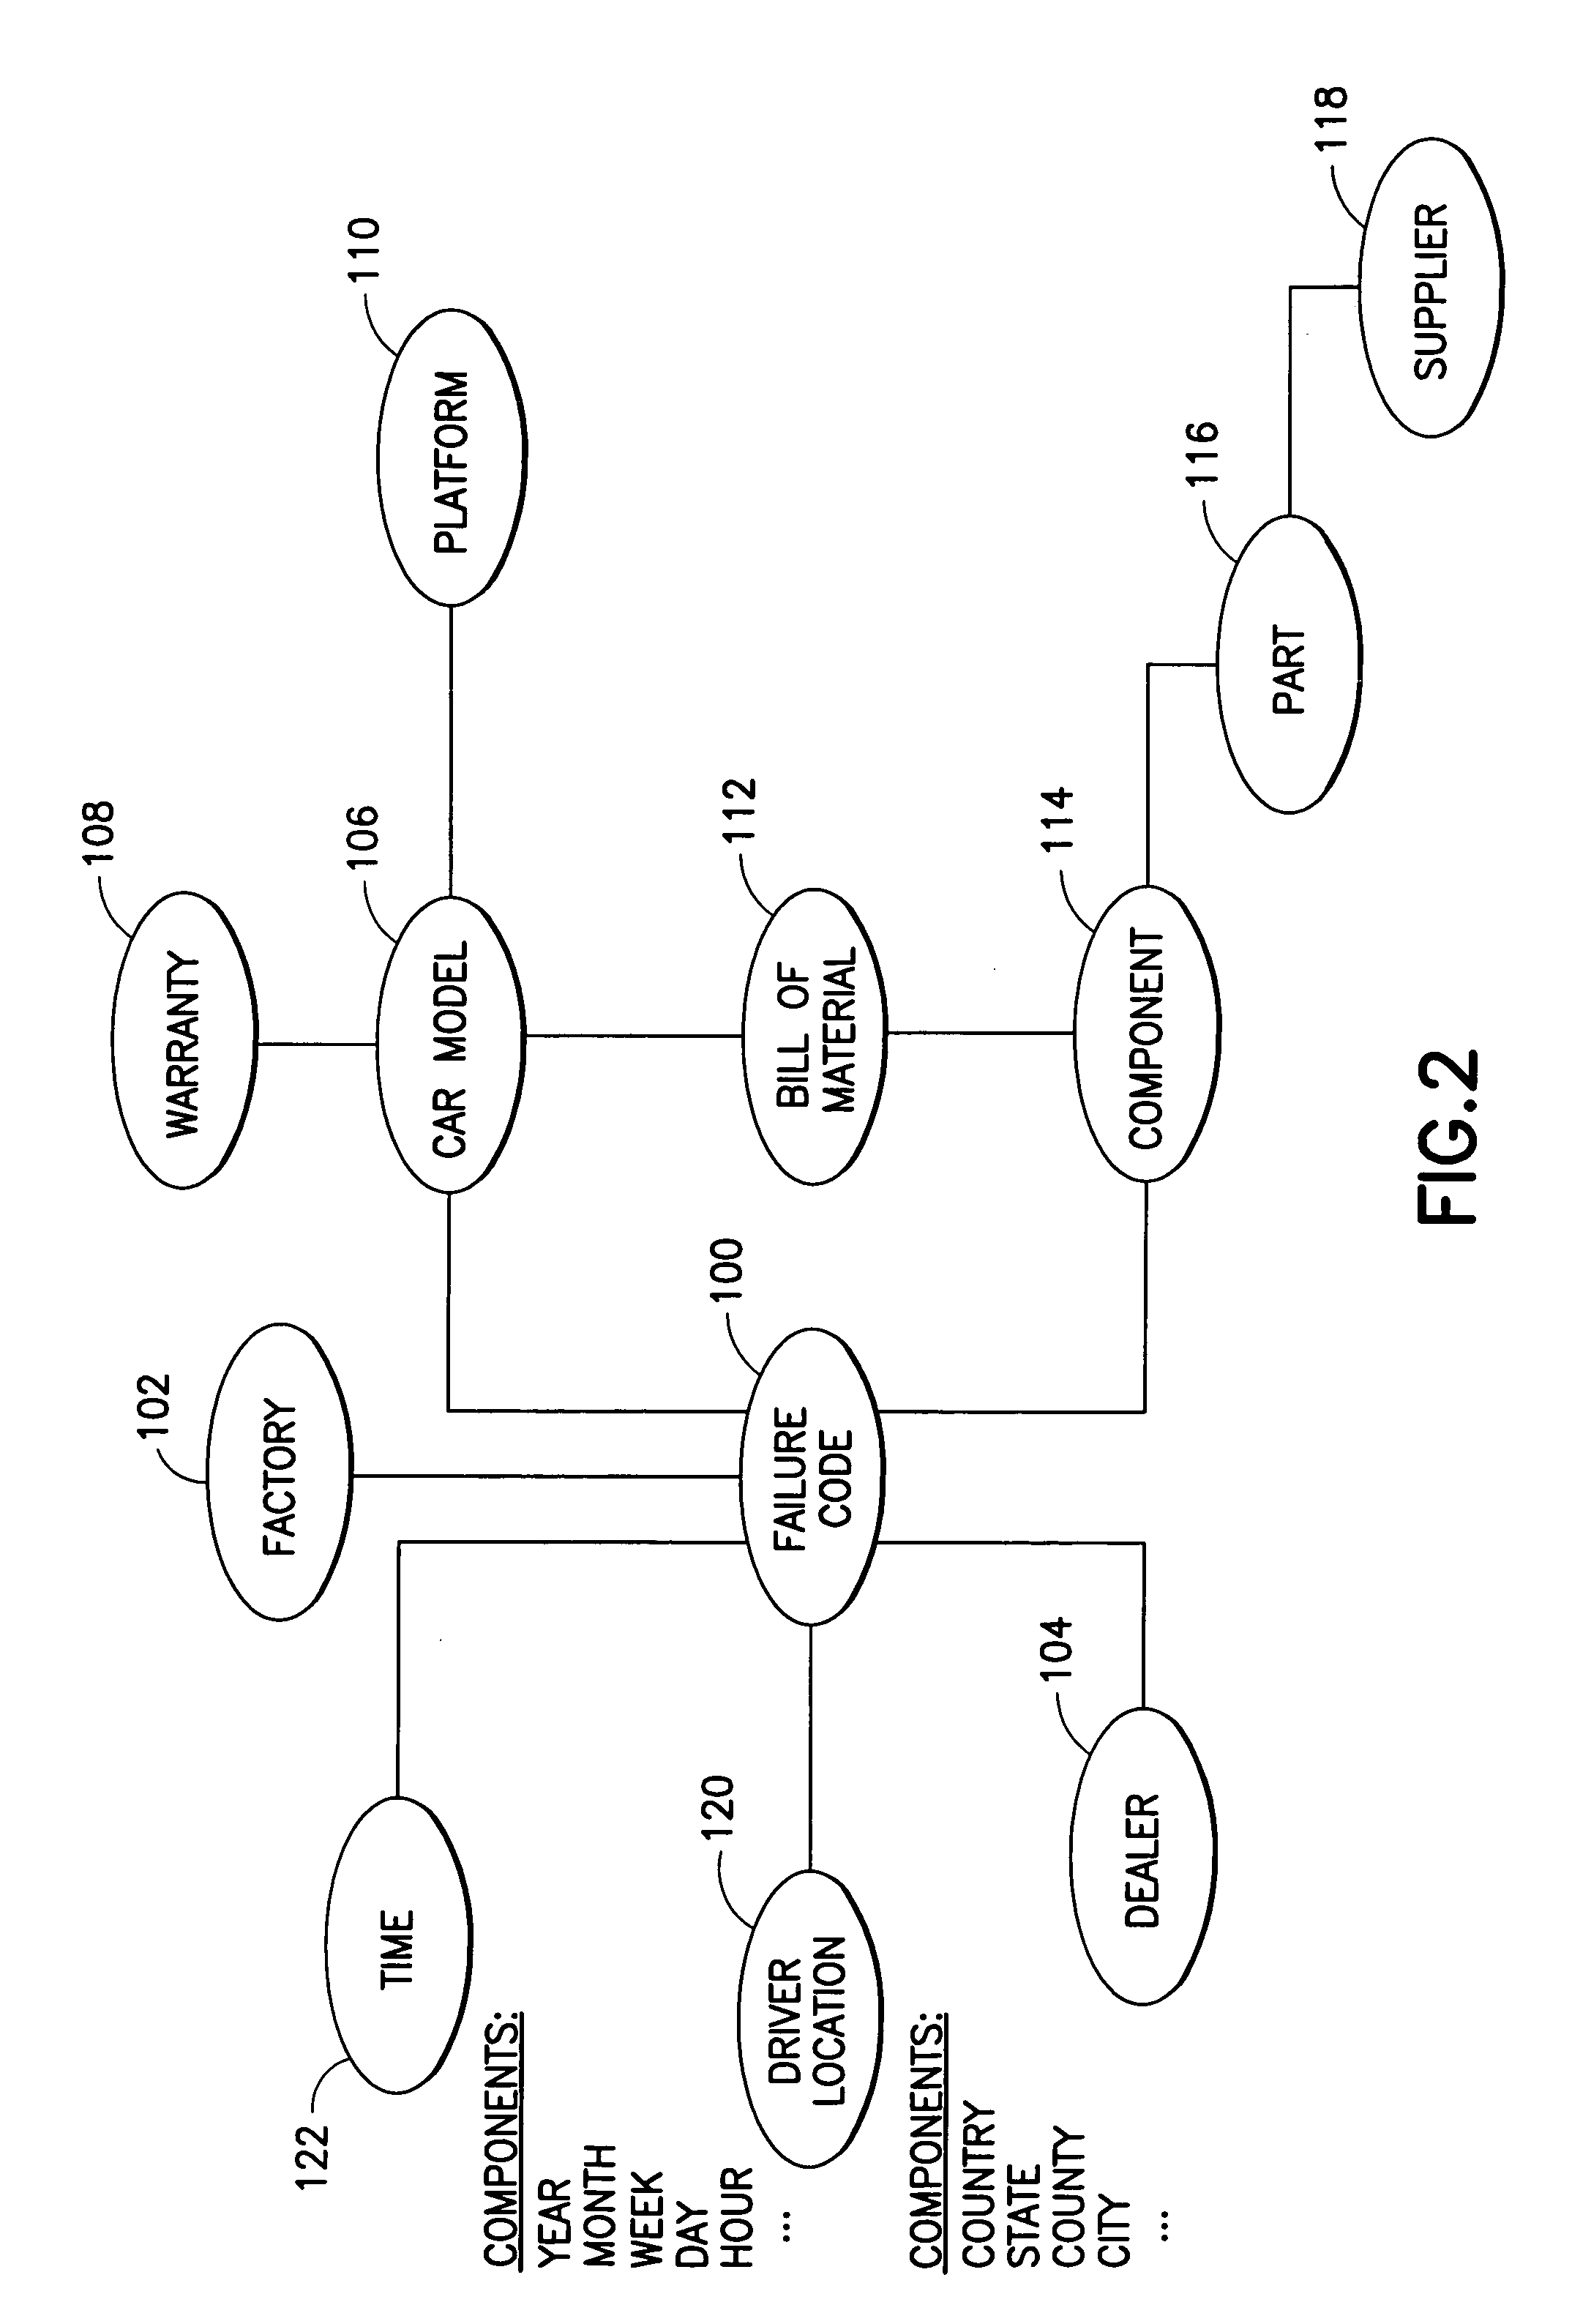 System and method for planning and generating queries for multi-dimensional analysis using domain models and data federation